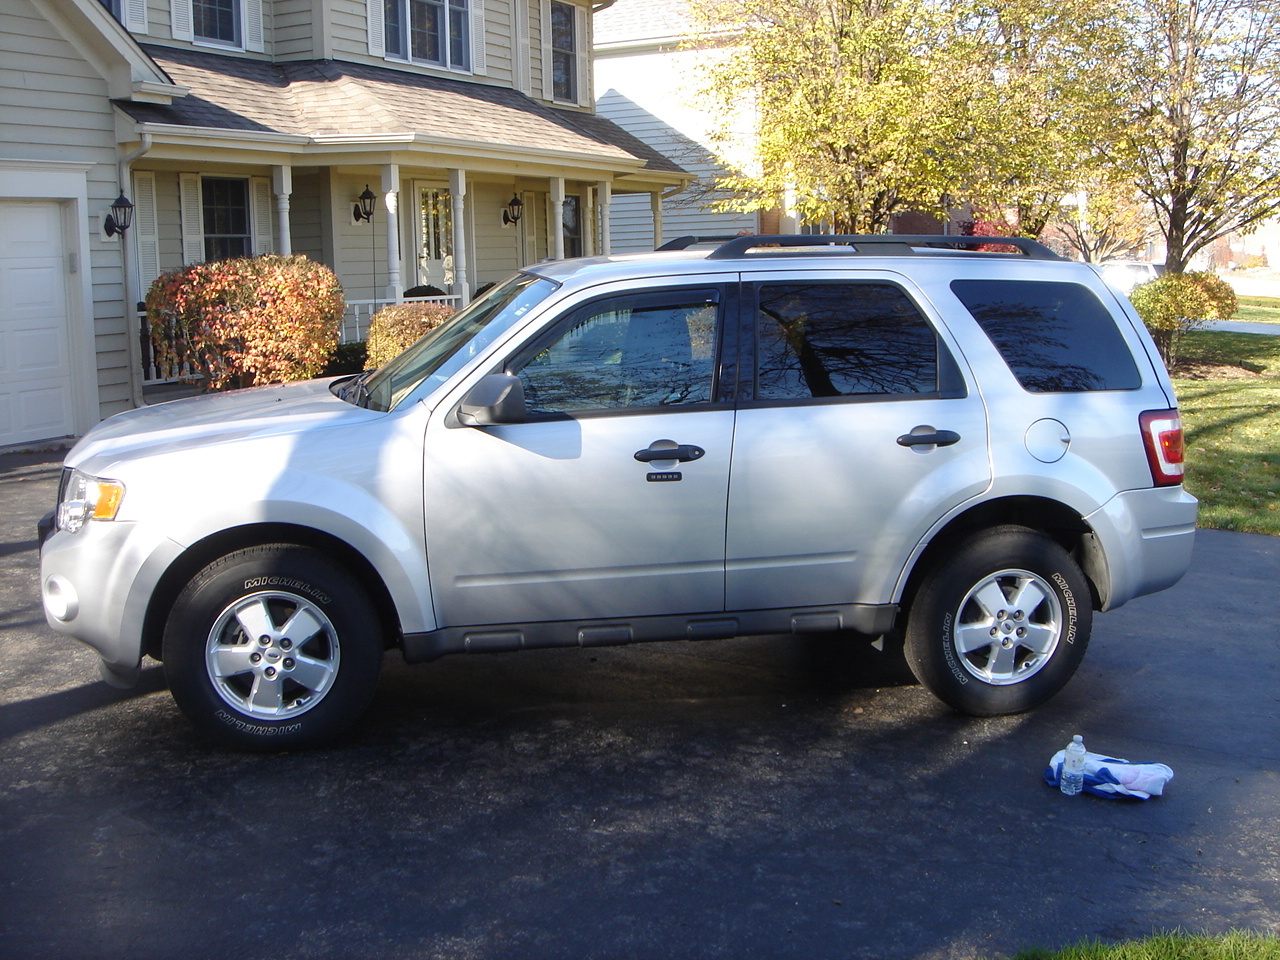 2010 Ford escape rollover rating #2